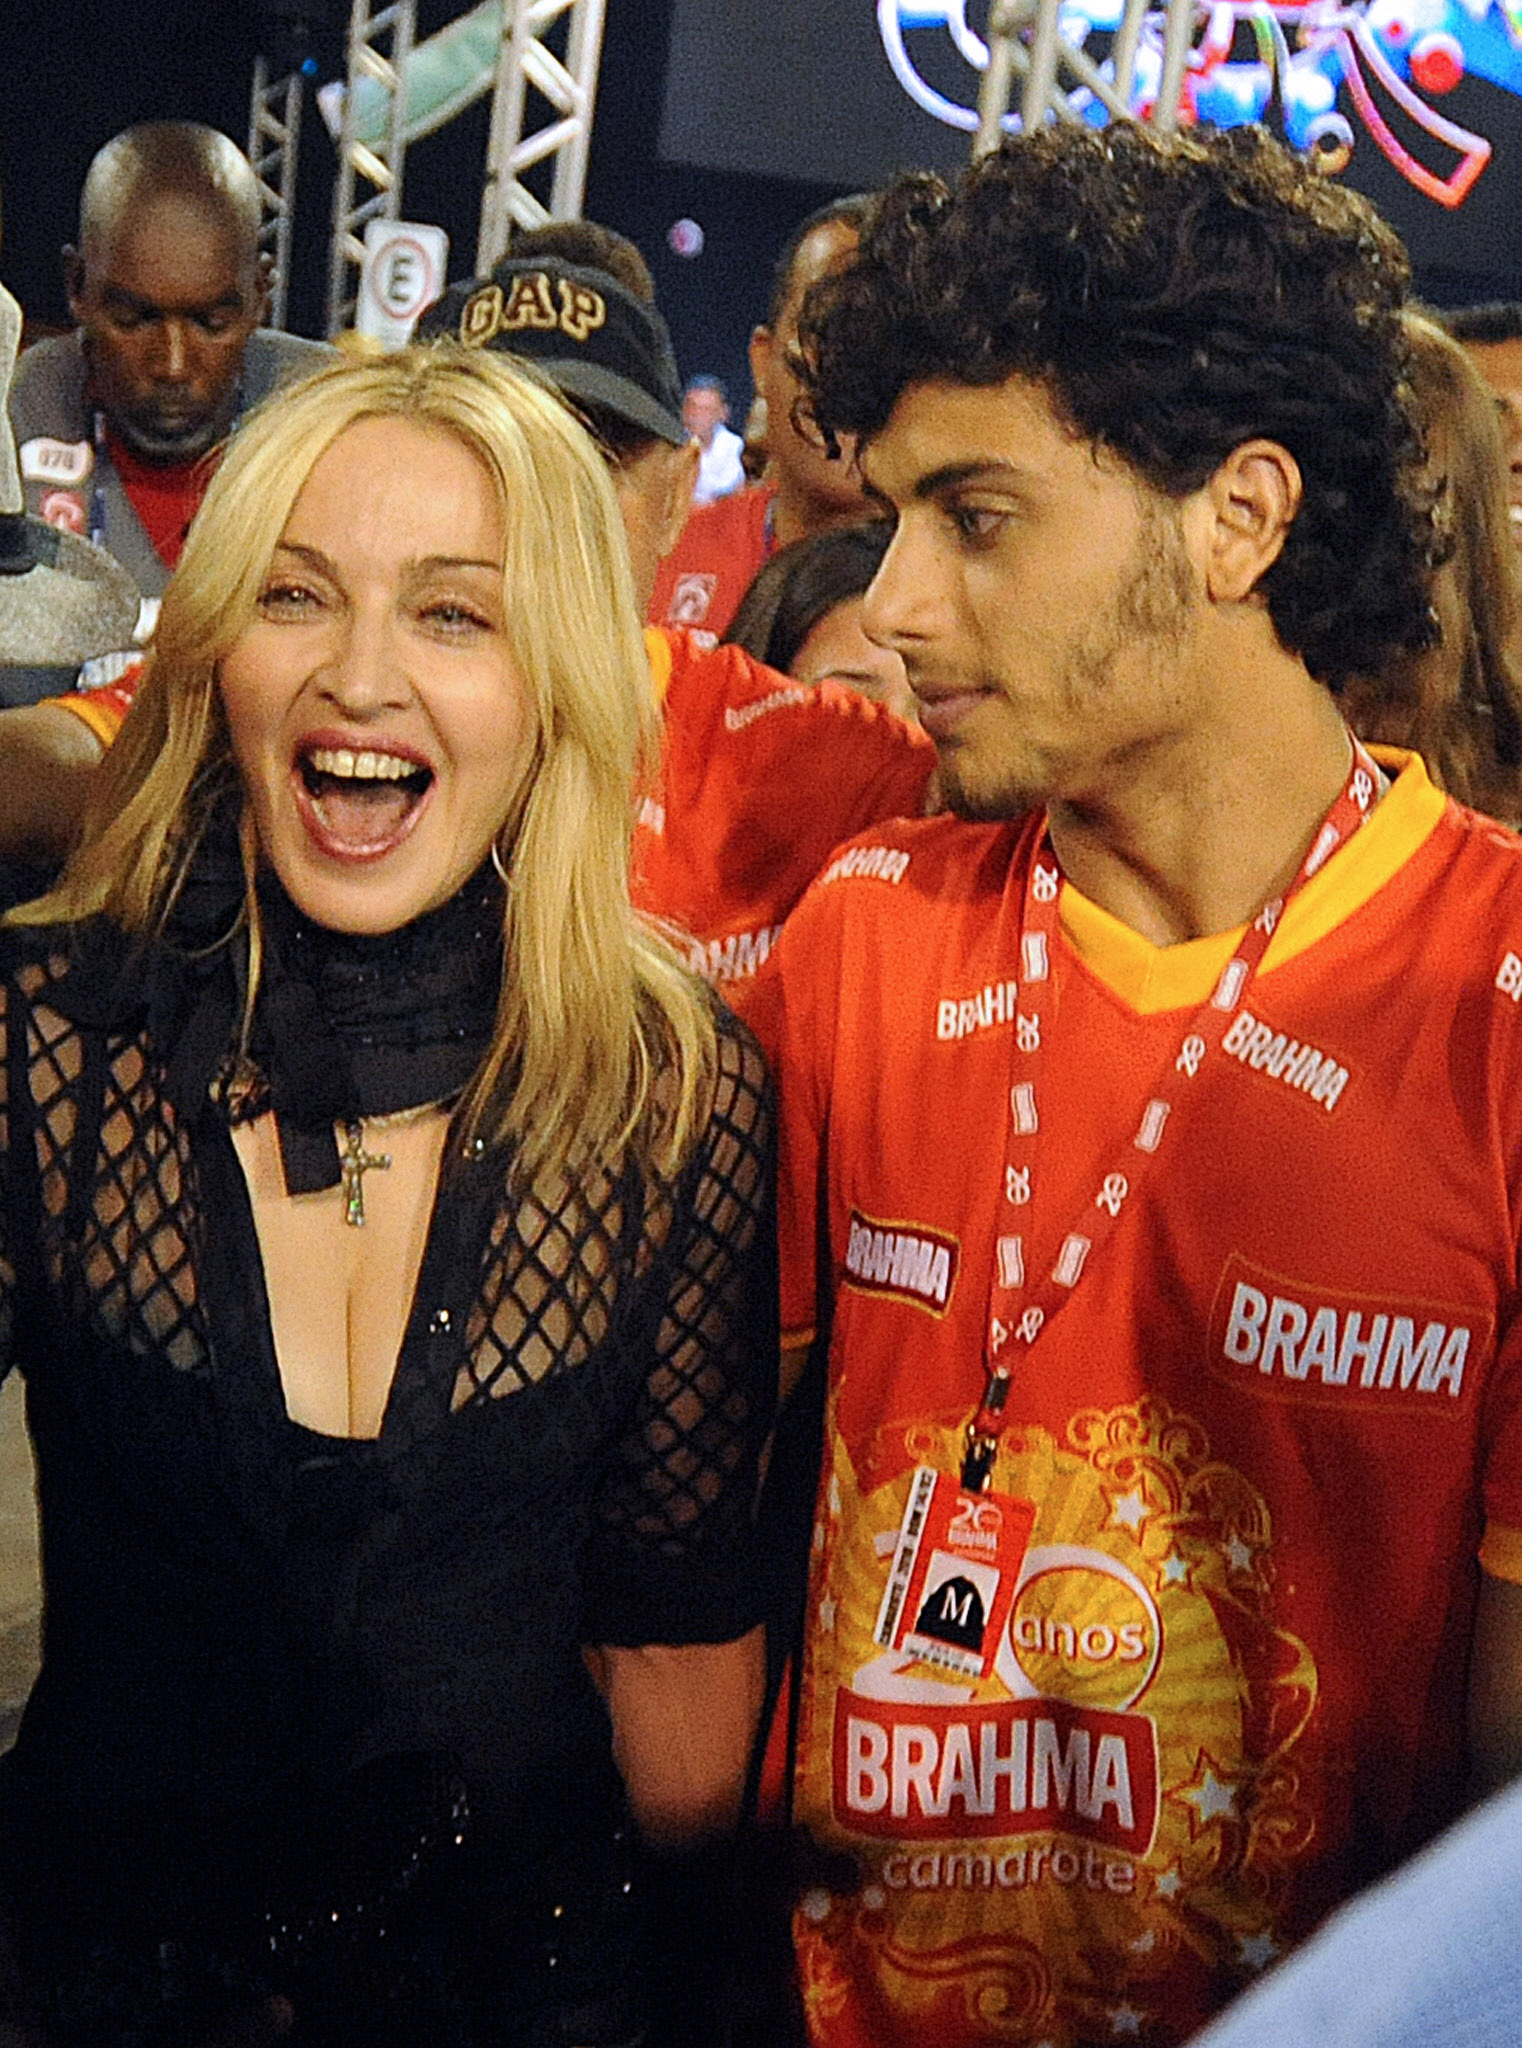 <p><a href="https://www.wonderwall.com/celebrity/profiles/overview/madonna-432.article">Madonna</a> has romanced quite a few super-hot younger men! Take Brazilian model Jesus Luz, for example: The couple had a 29-year age gap when they dated back in 2009.</p>